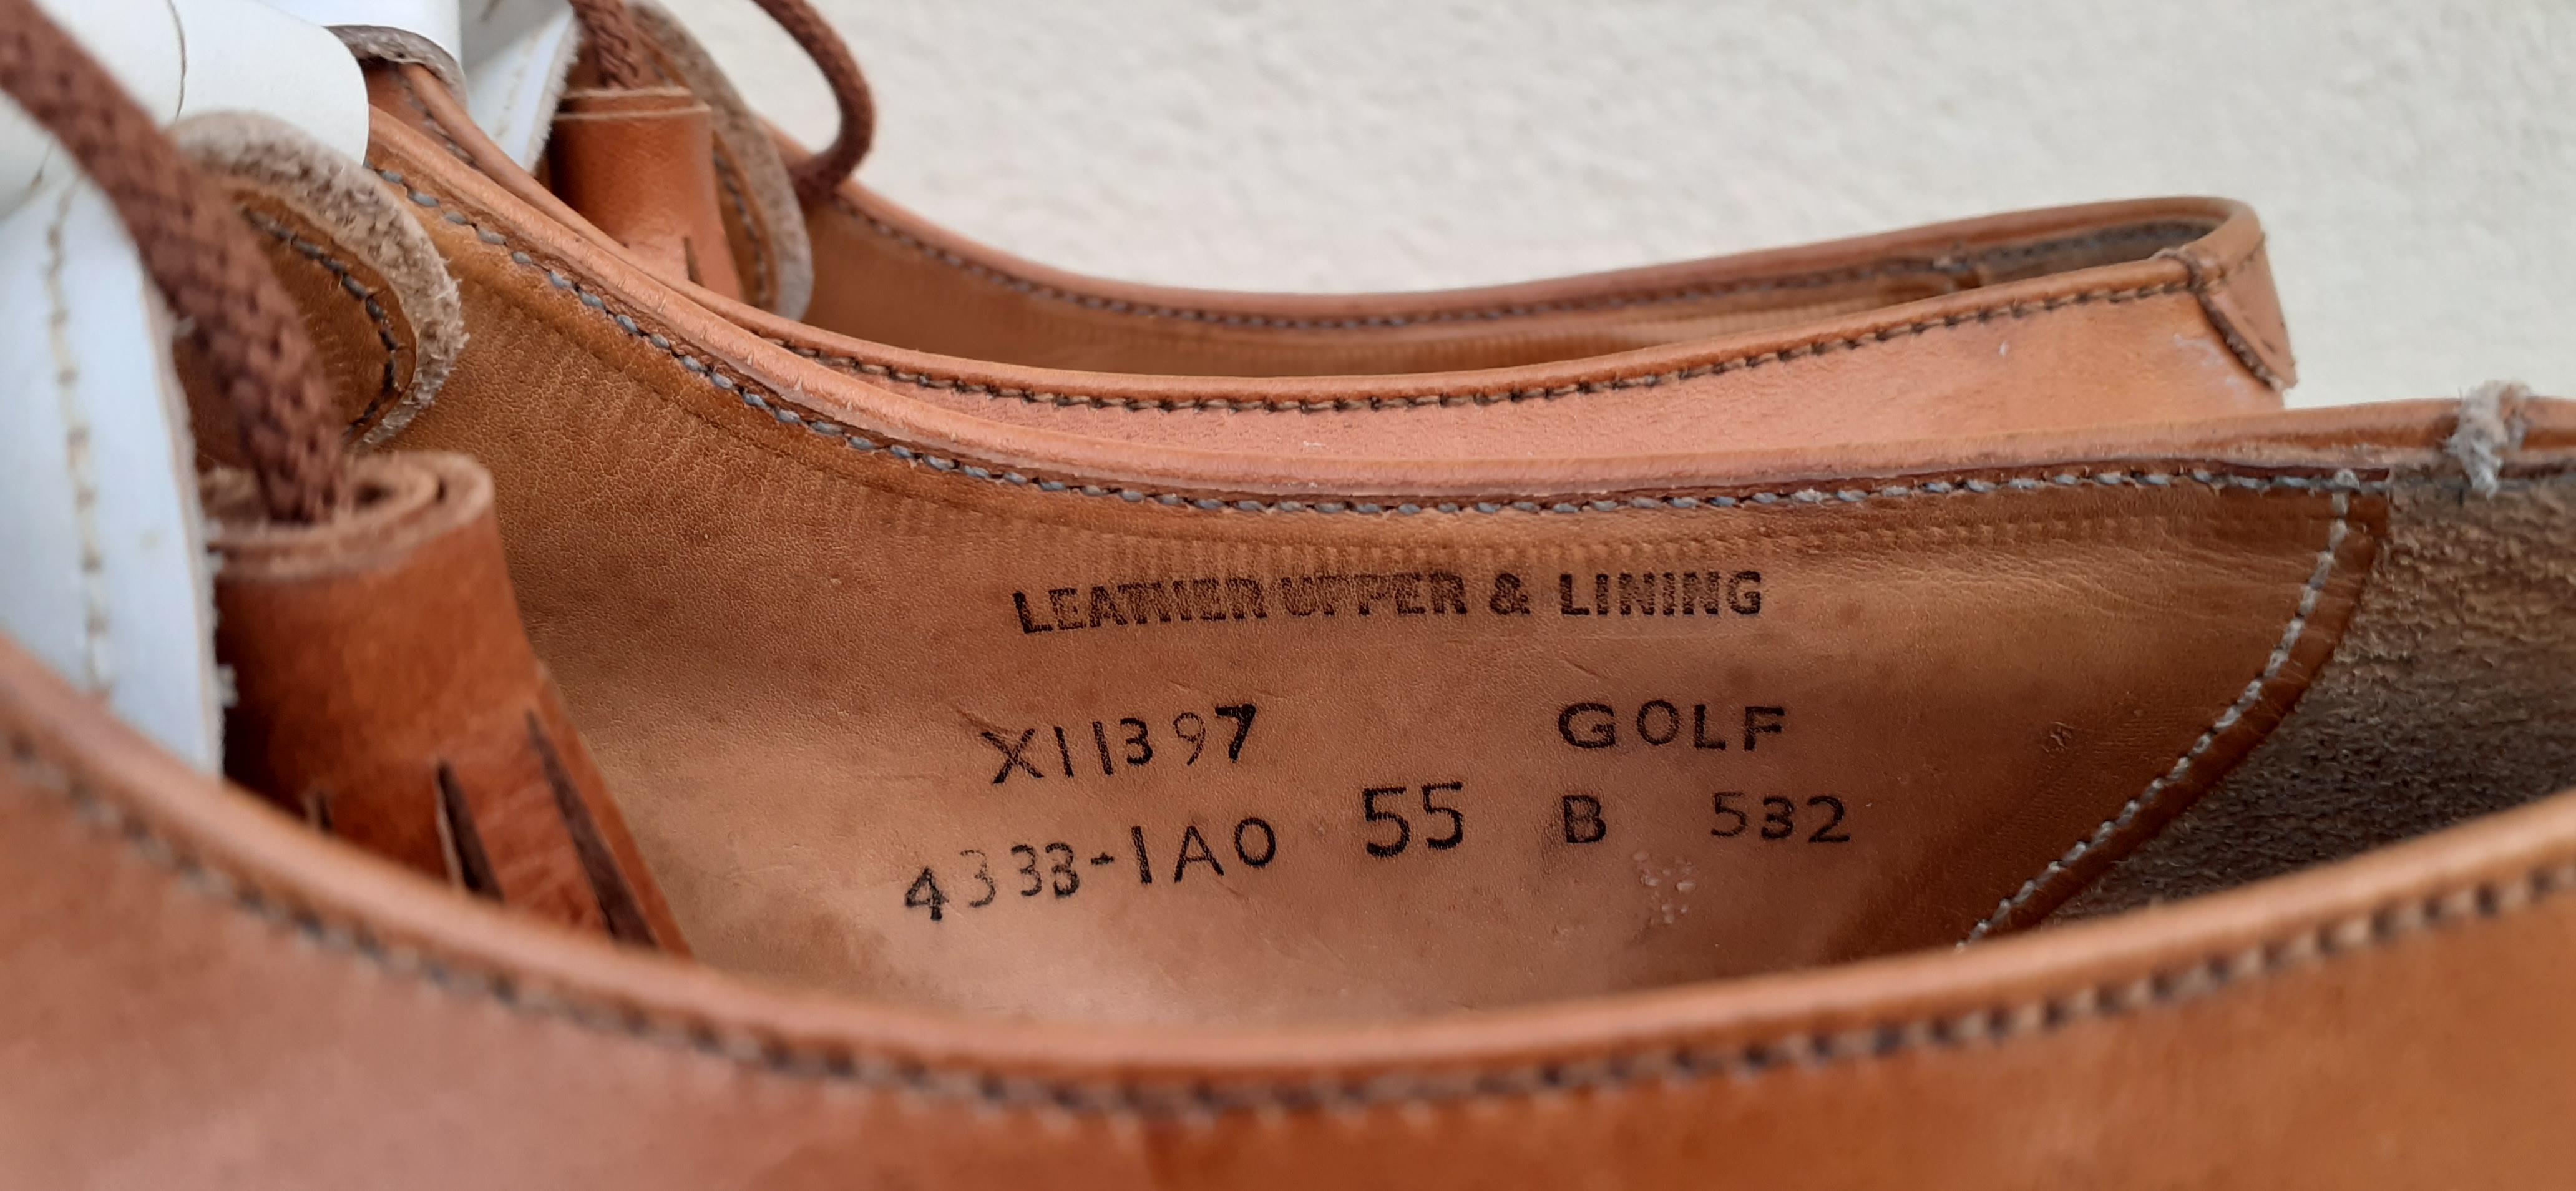 Exceptional Hermès Derbies Golf Shoes Gold and White Leather For Sale 3